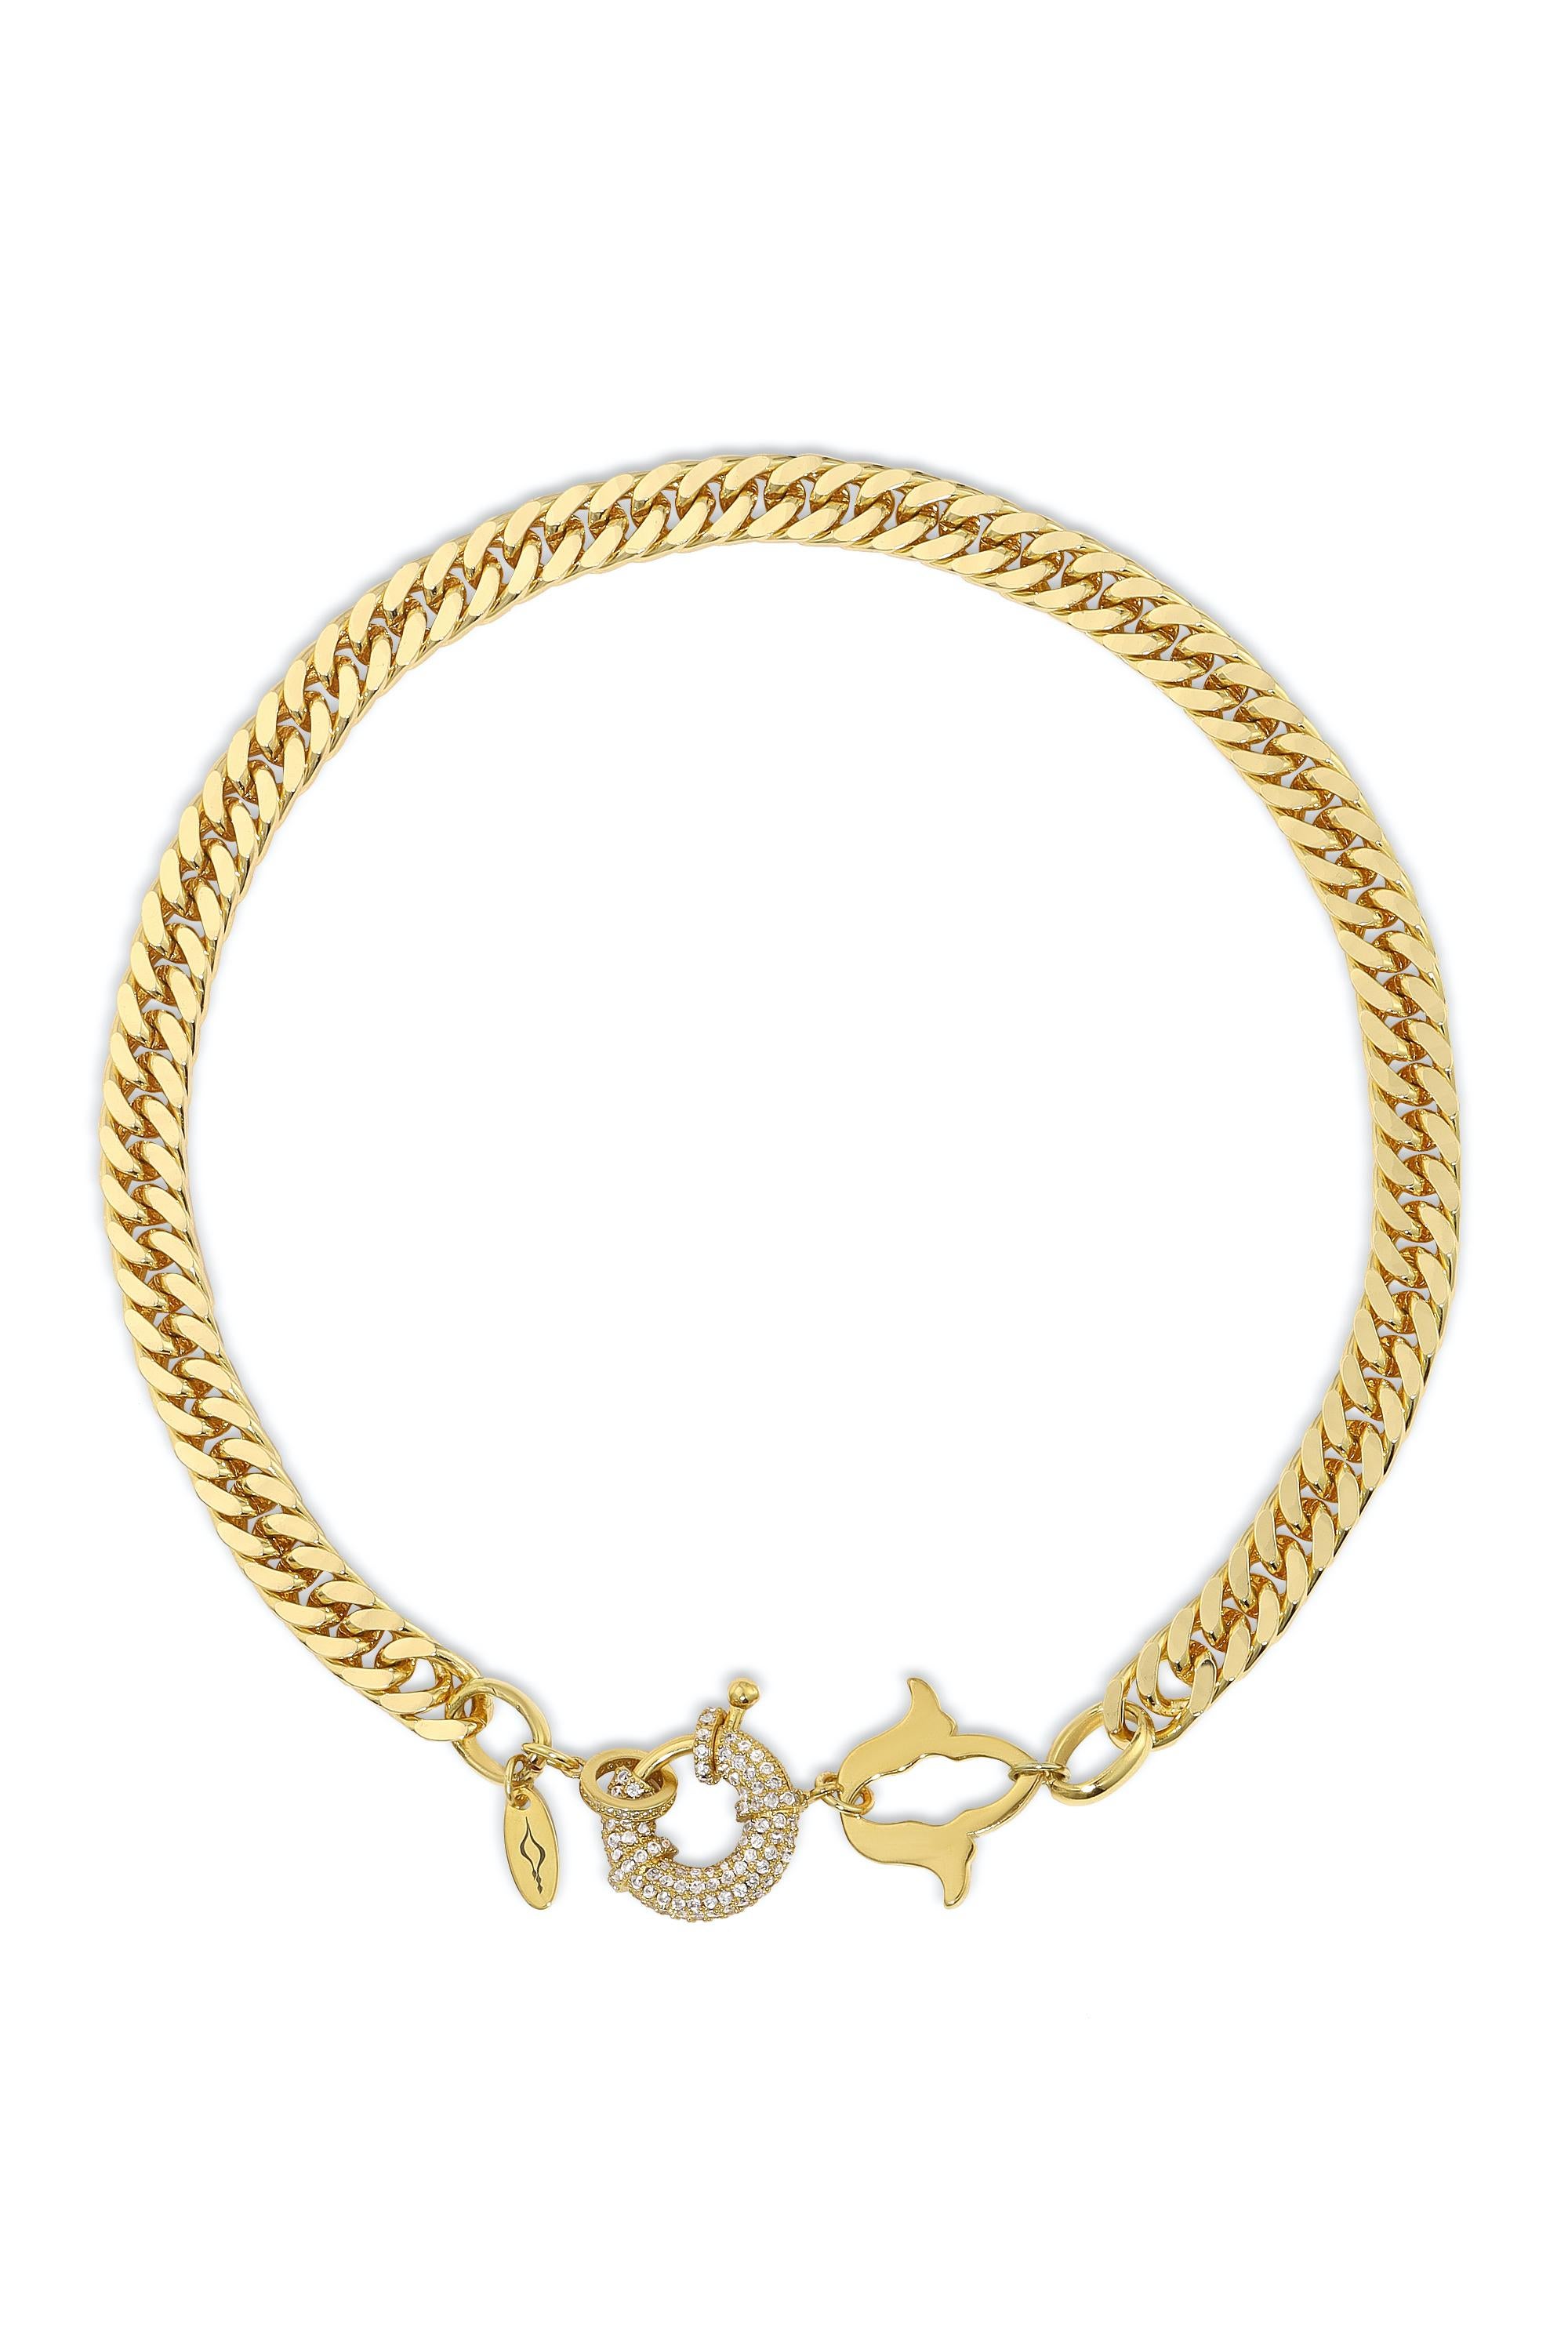 -Featuring a gold signature Charm
-Chunky Curb Chain
-Micro Pave Sailor Clasp
-18k Gold-plated
-Comes with polishing cloth
